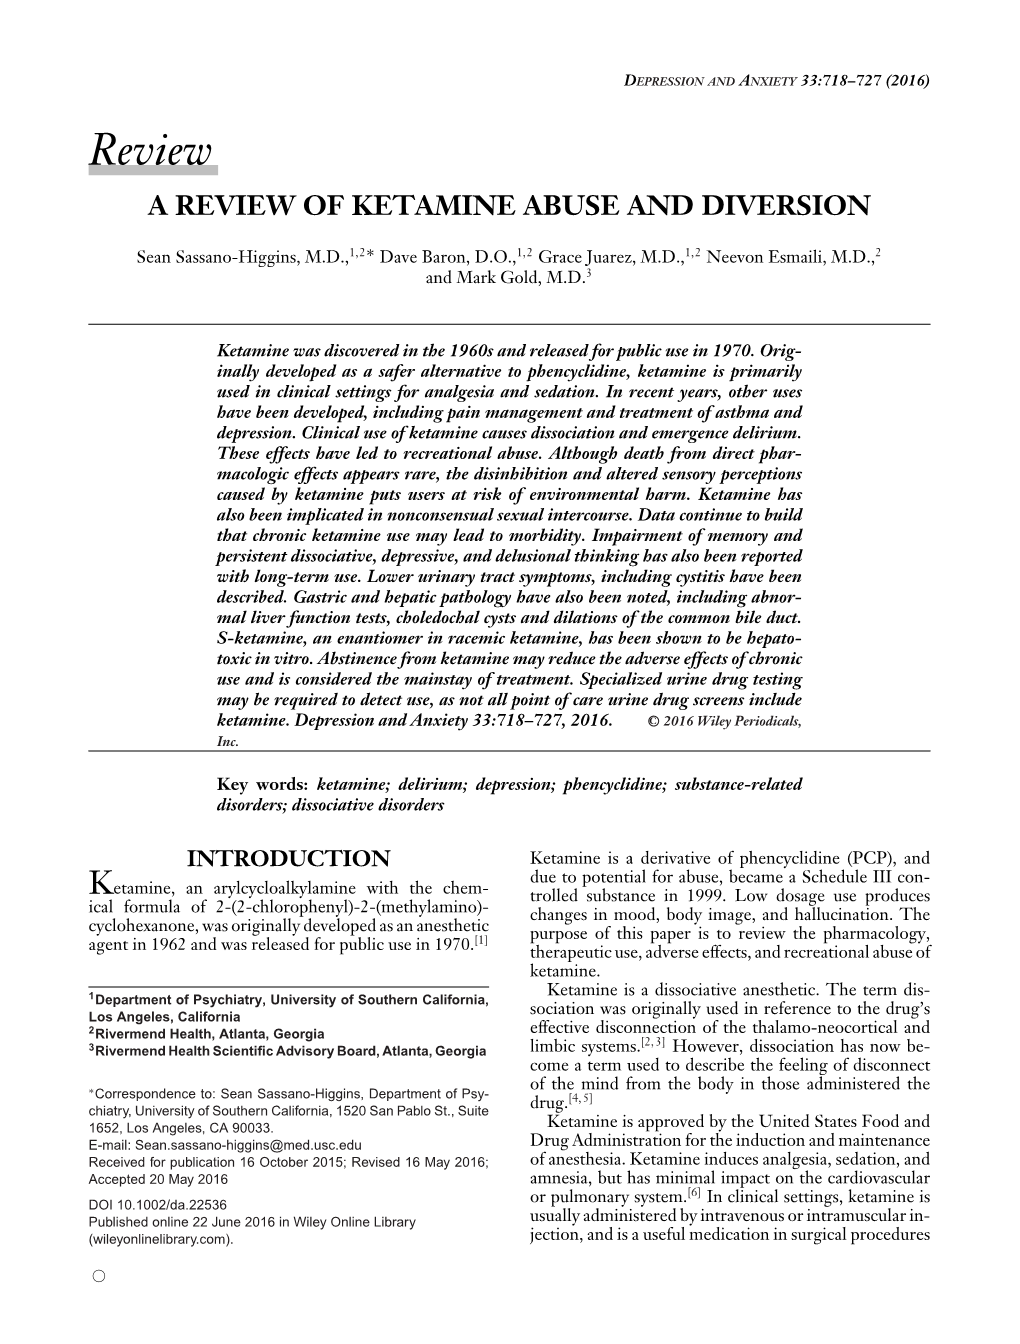 A Review of Ketamine Abuse and Diversion